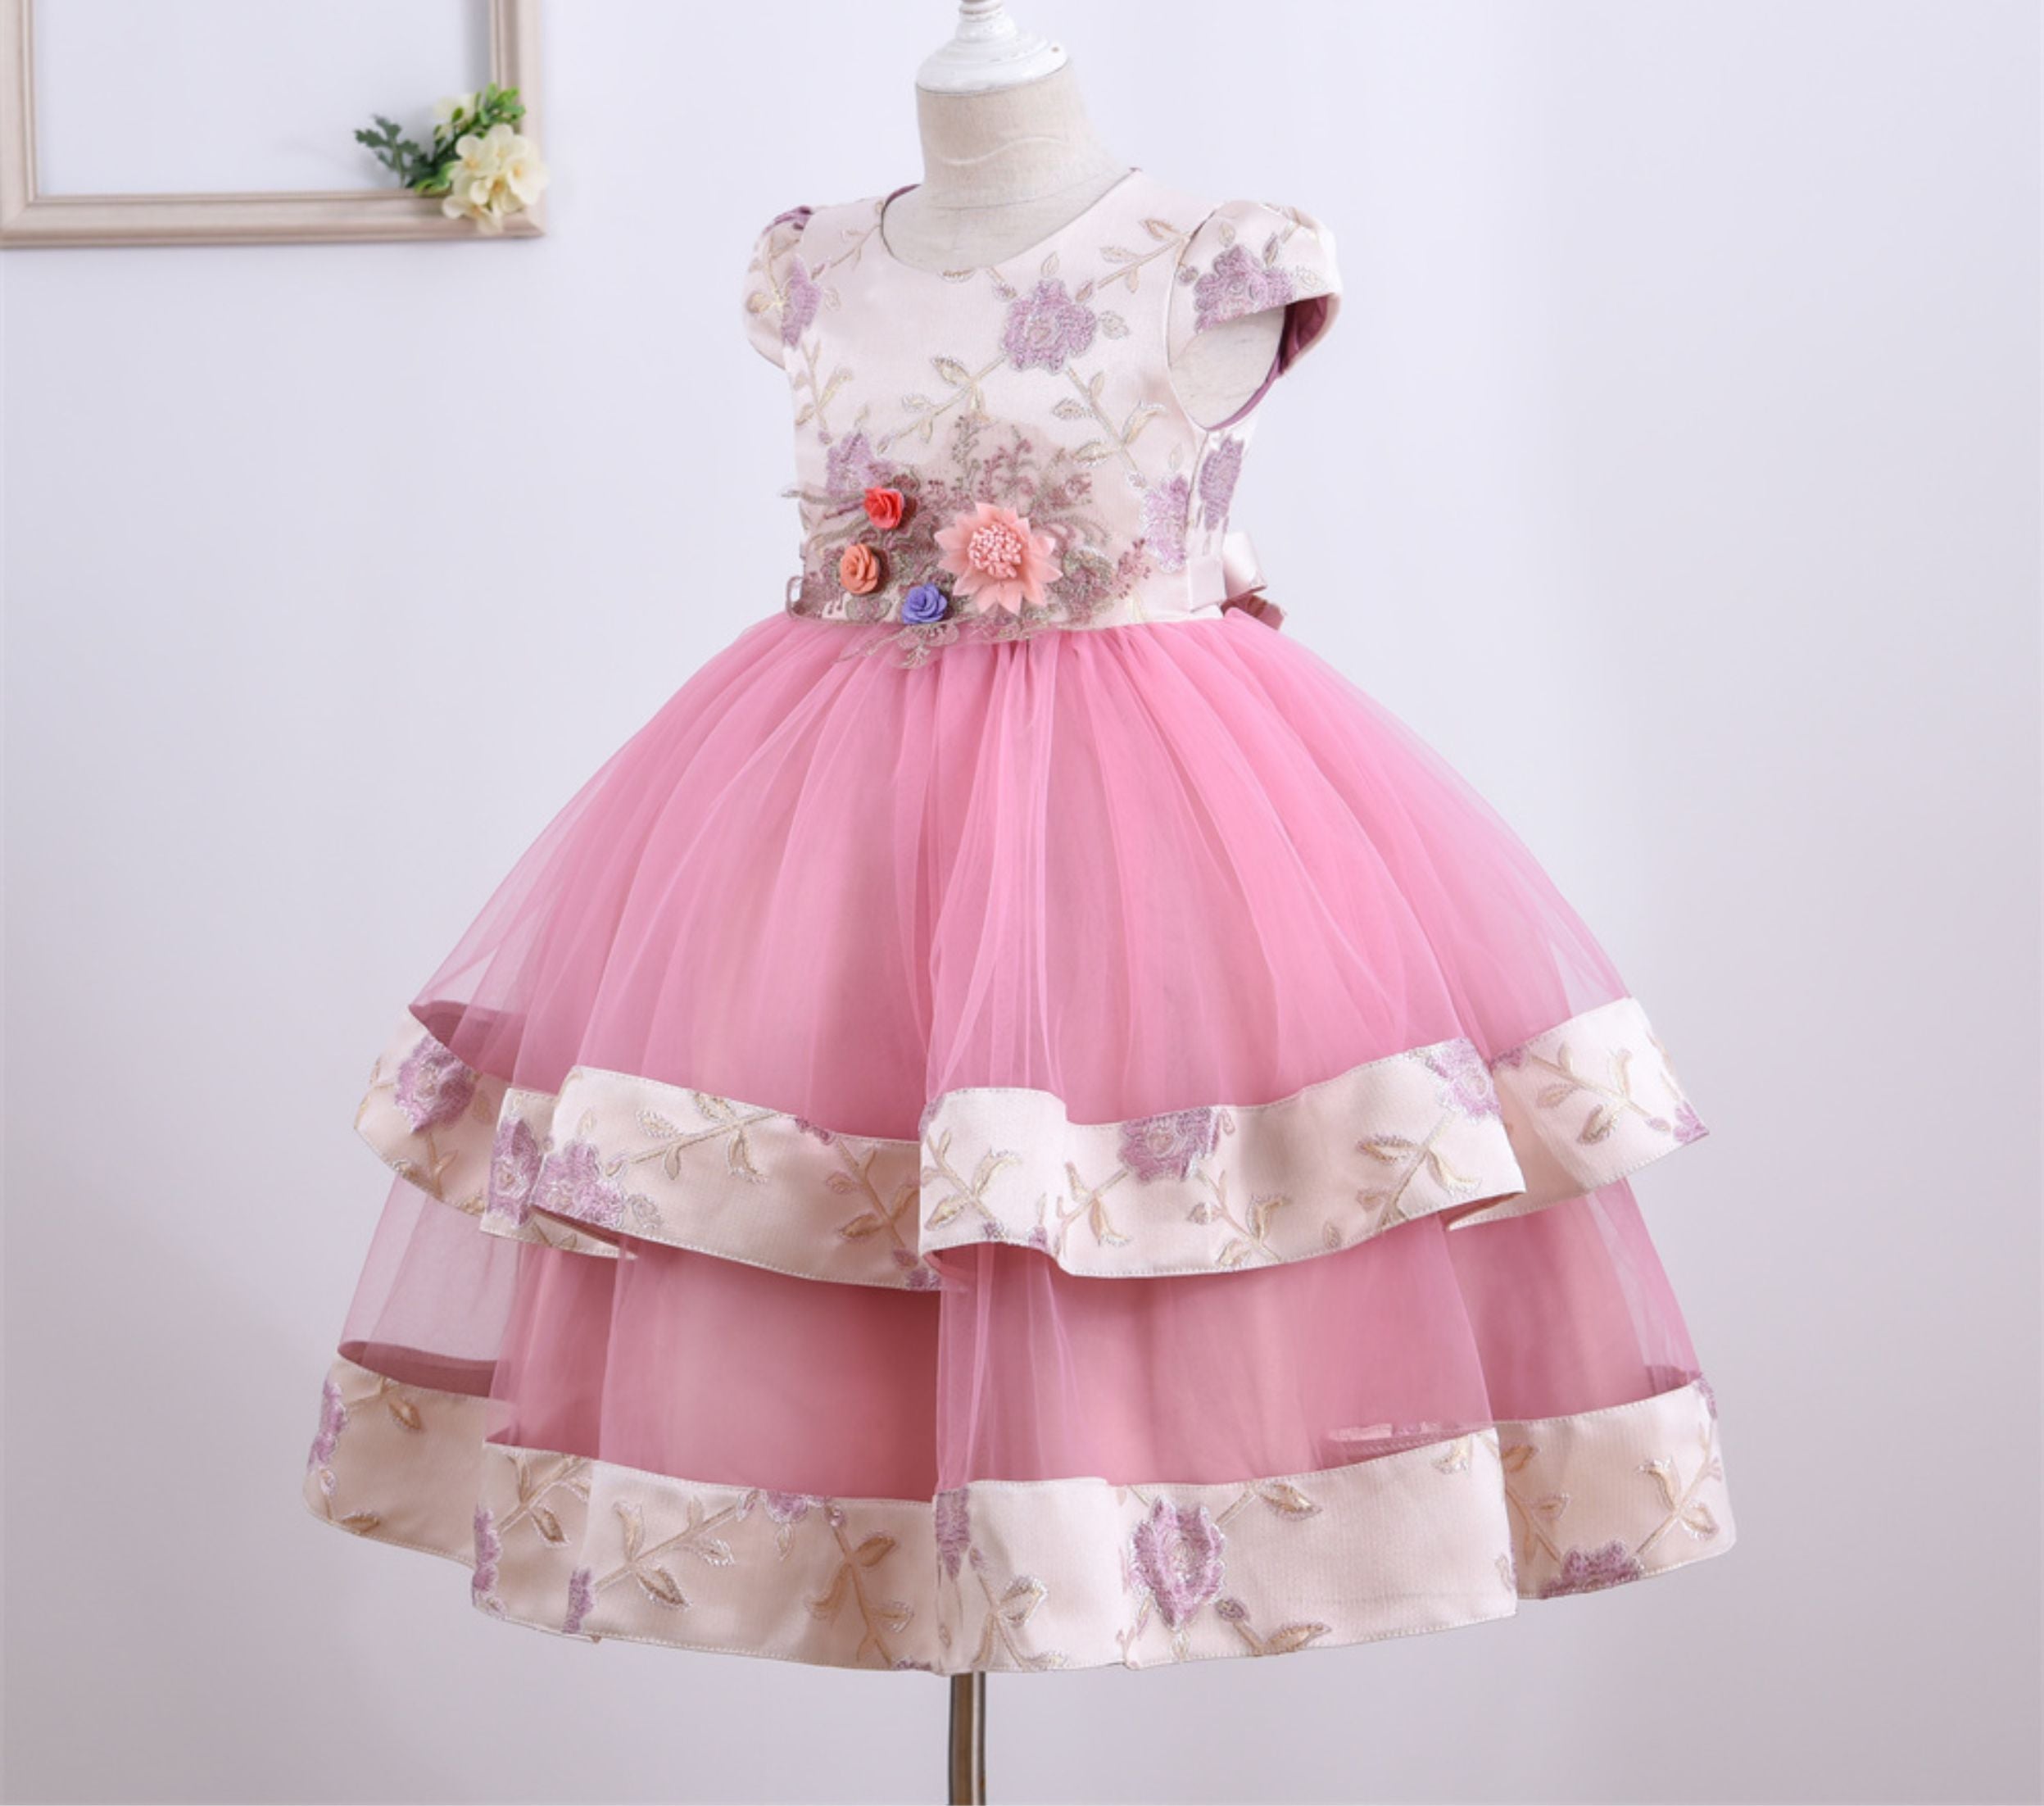 Girls Dresses for All Occasions | Luxury Childrenswear – Mia Bambina  Boutique